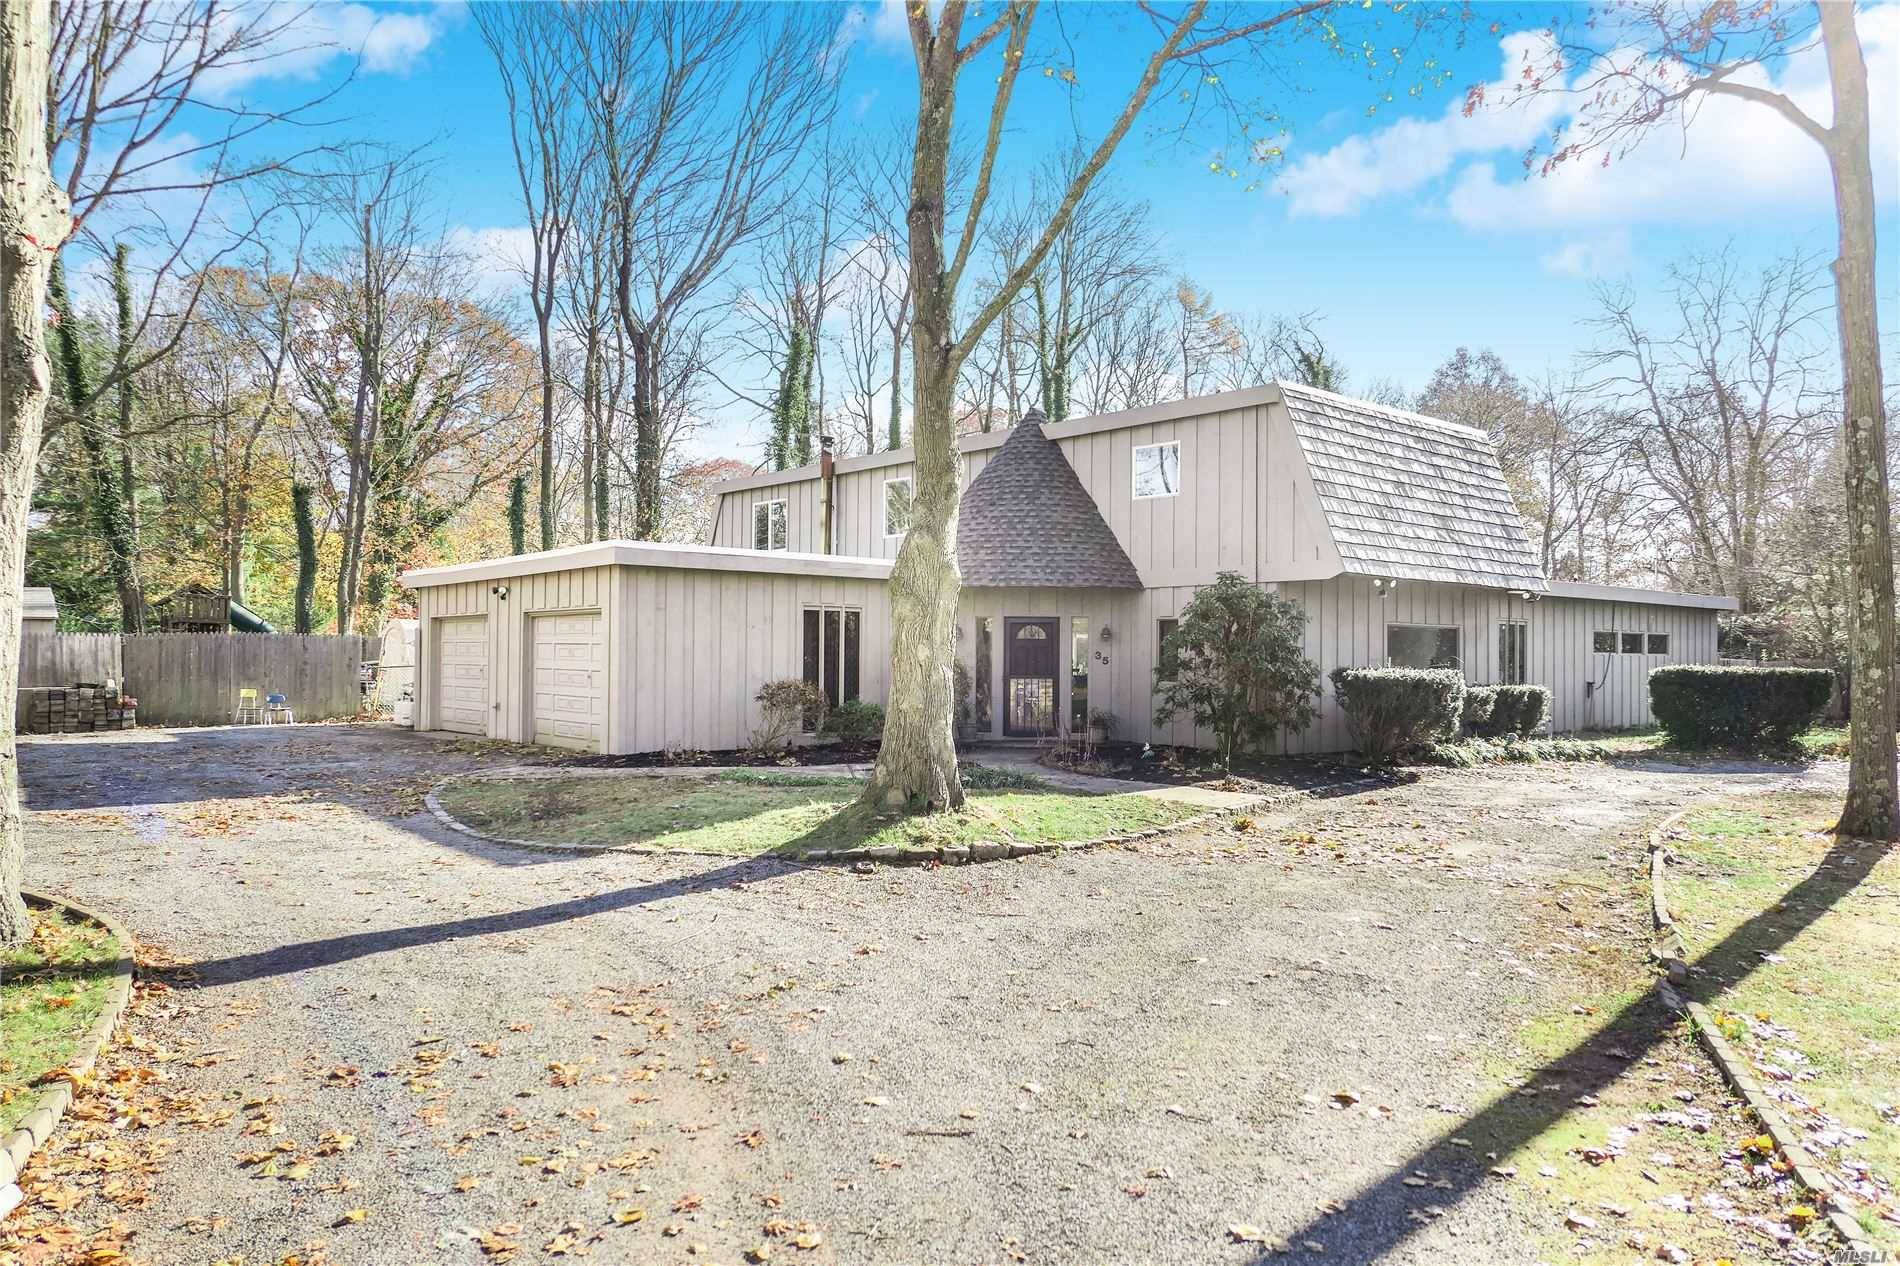 Start Your New Year In Luxury as Mid Century Meets Modern For This Unique and Distinguishing Home Located In Bellport Beach Estates !